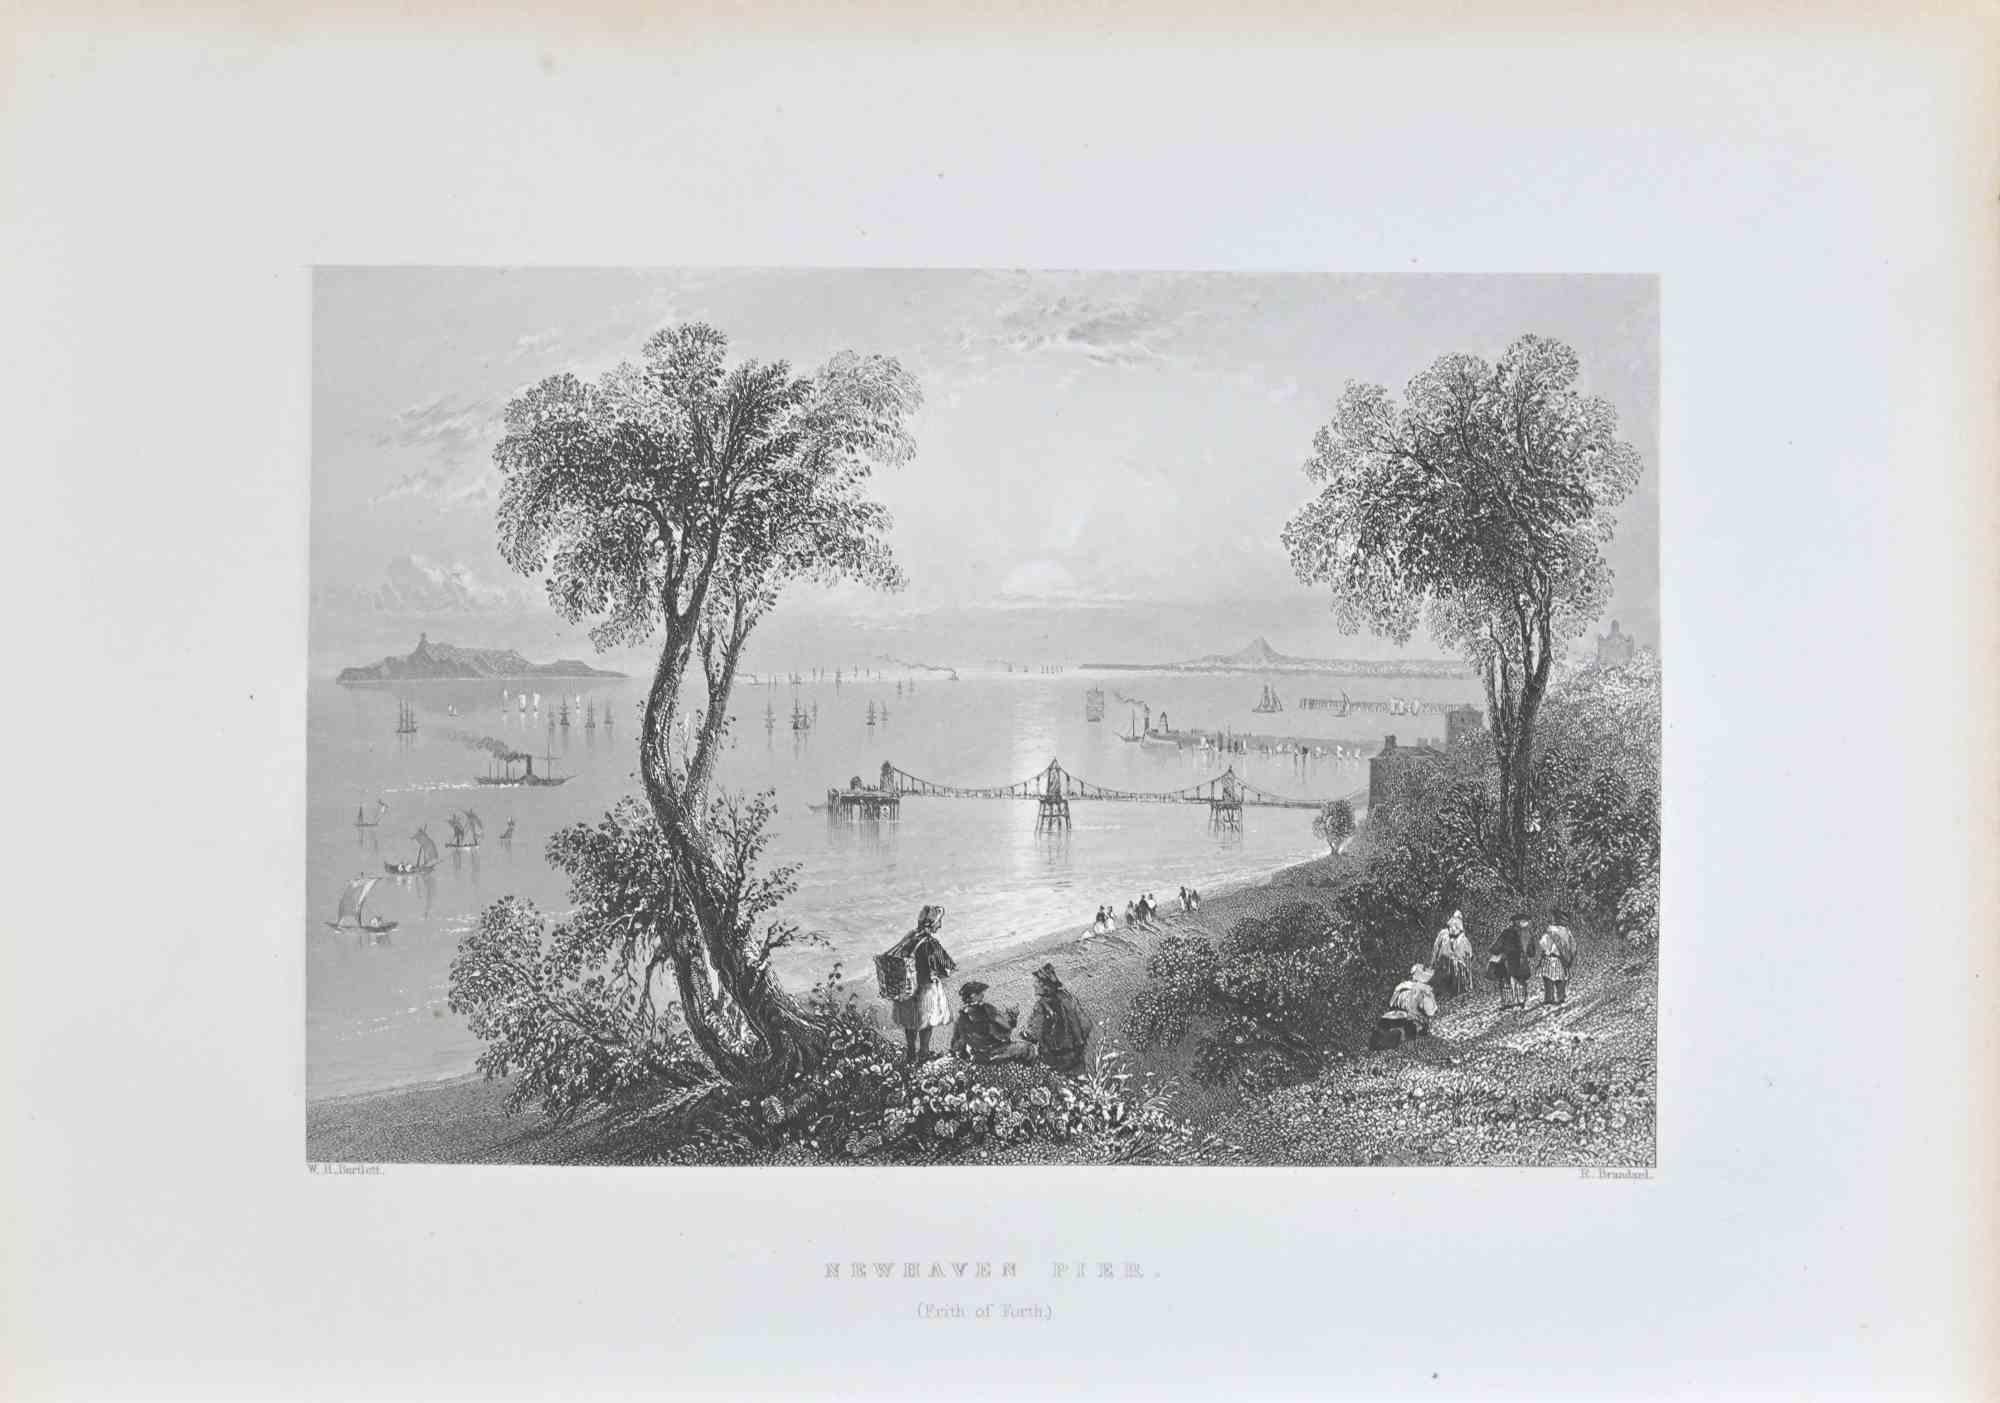 Newhaven Pier is an engraving on paper realized by R. Brandard in 1838.

The artwork is in good condition.

The artwork is depicted in a well-balanced composition.
